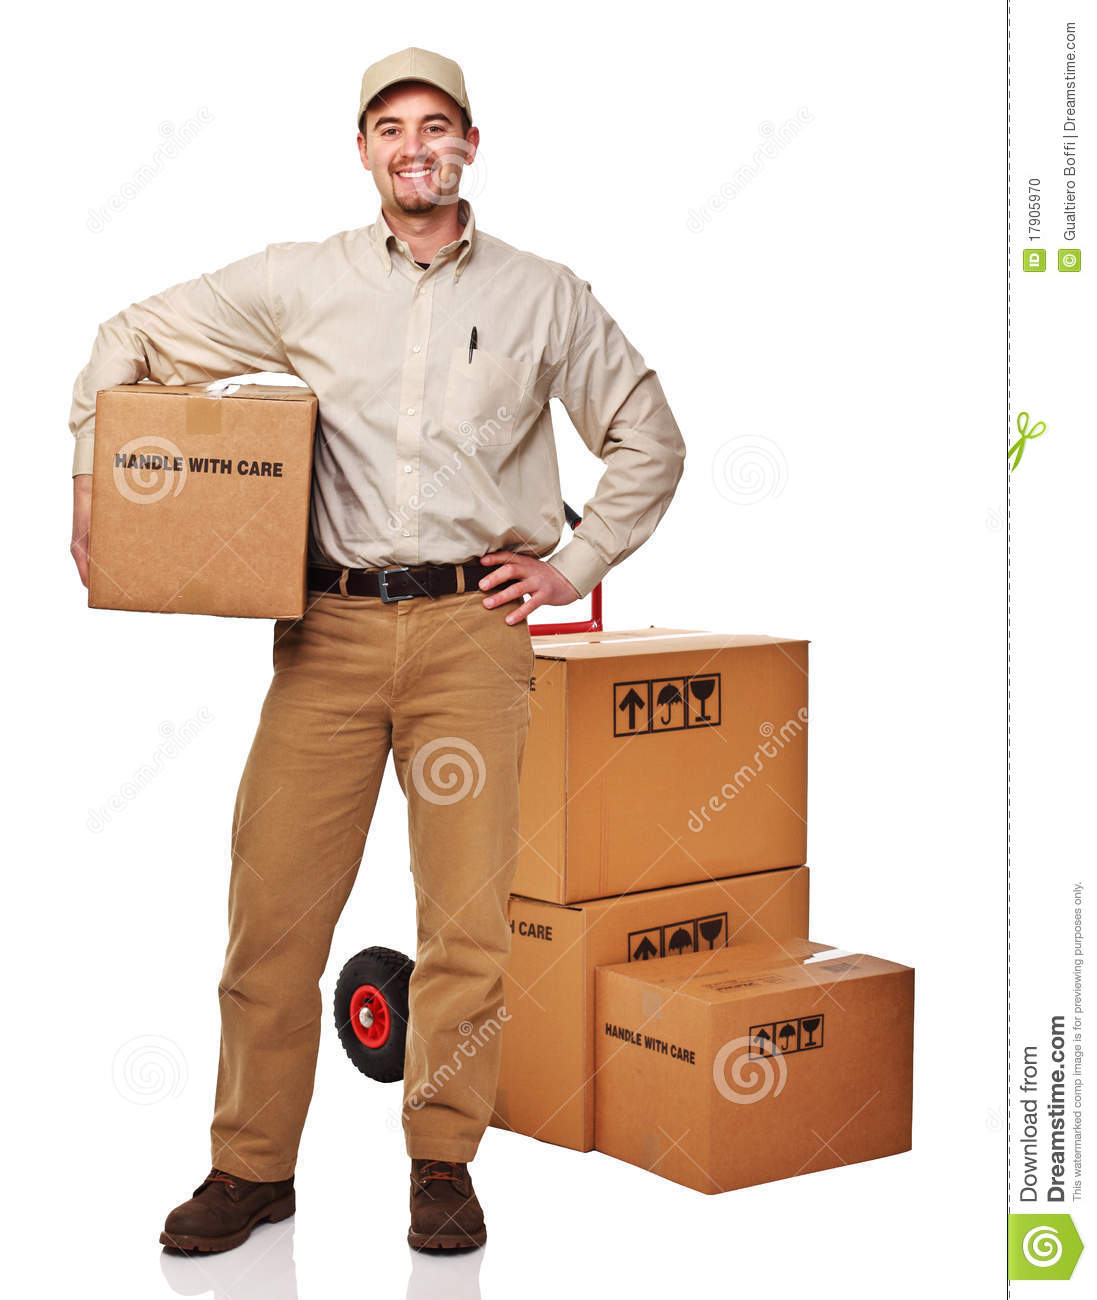 High Resolution Wallpaper | Delivery Man 1097x1300 px